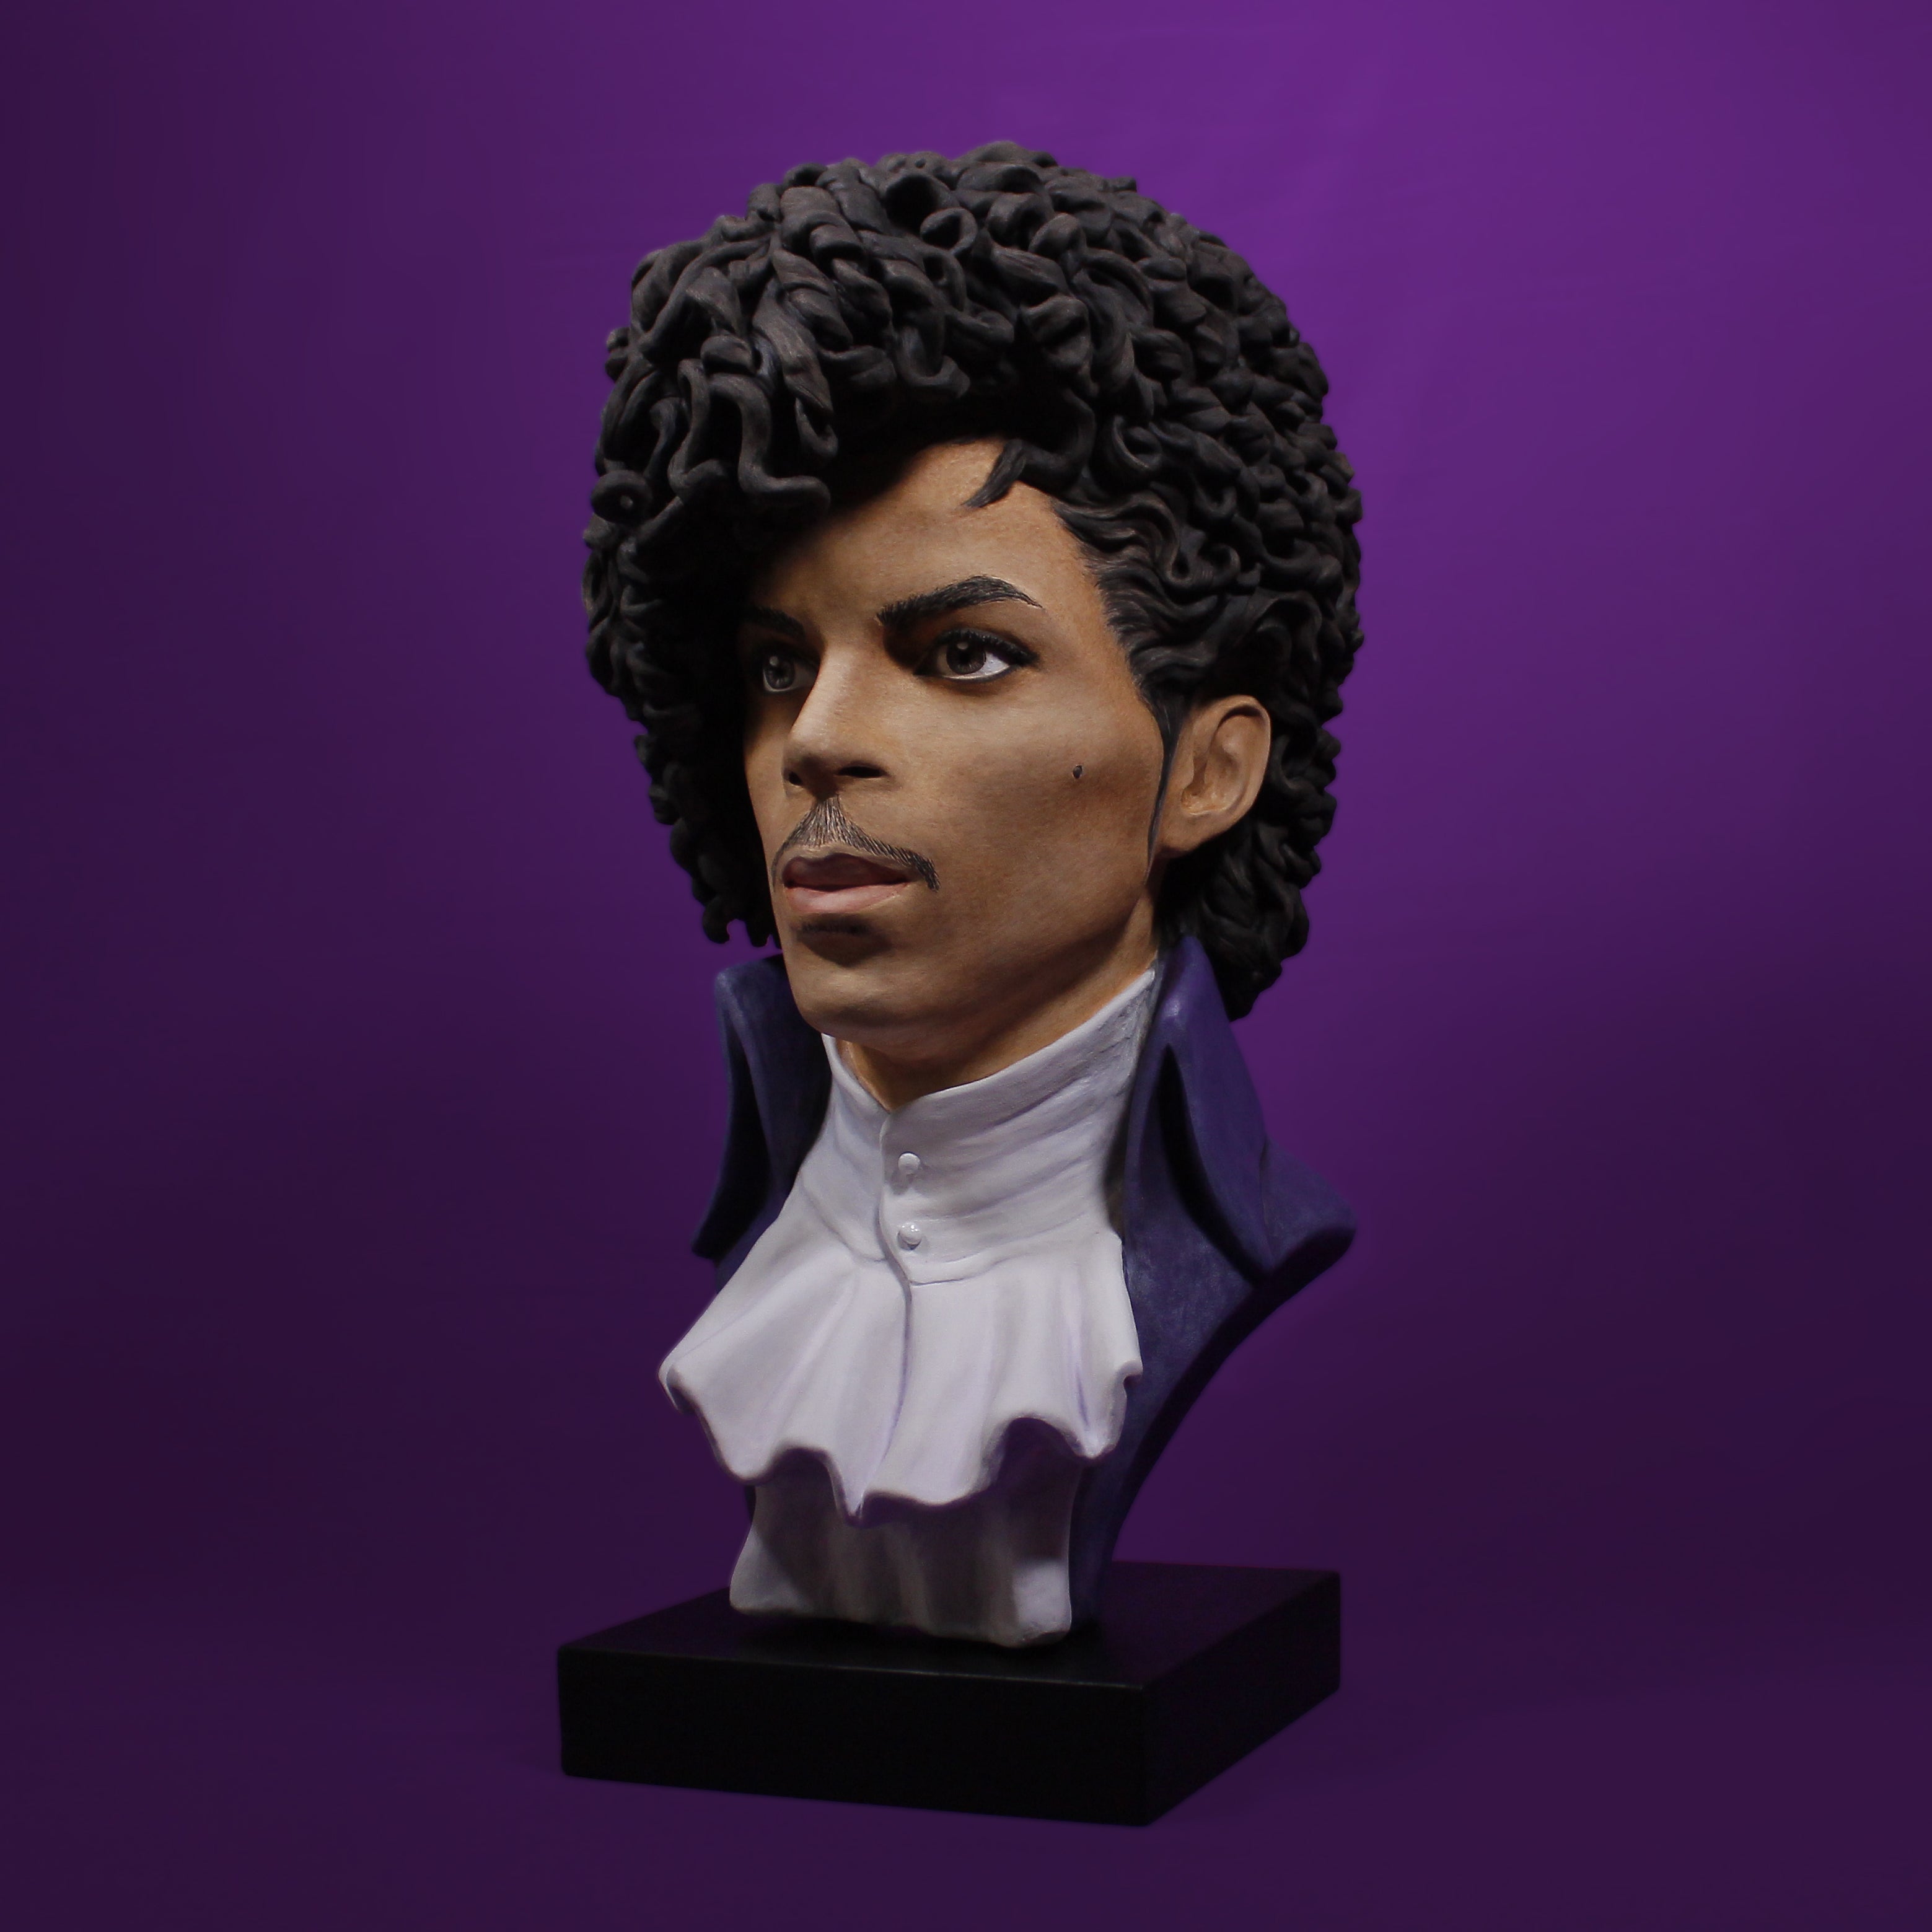 Prince portrait bust sculpture made of painted ceramic by Maria Primolan Sculptor